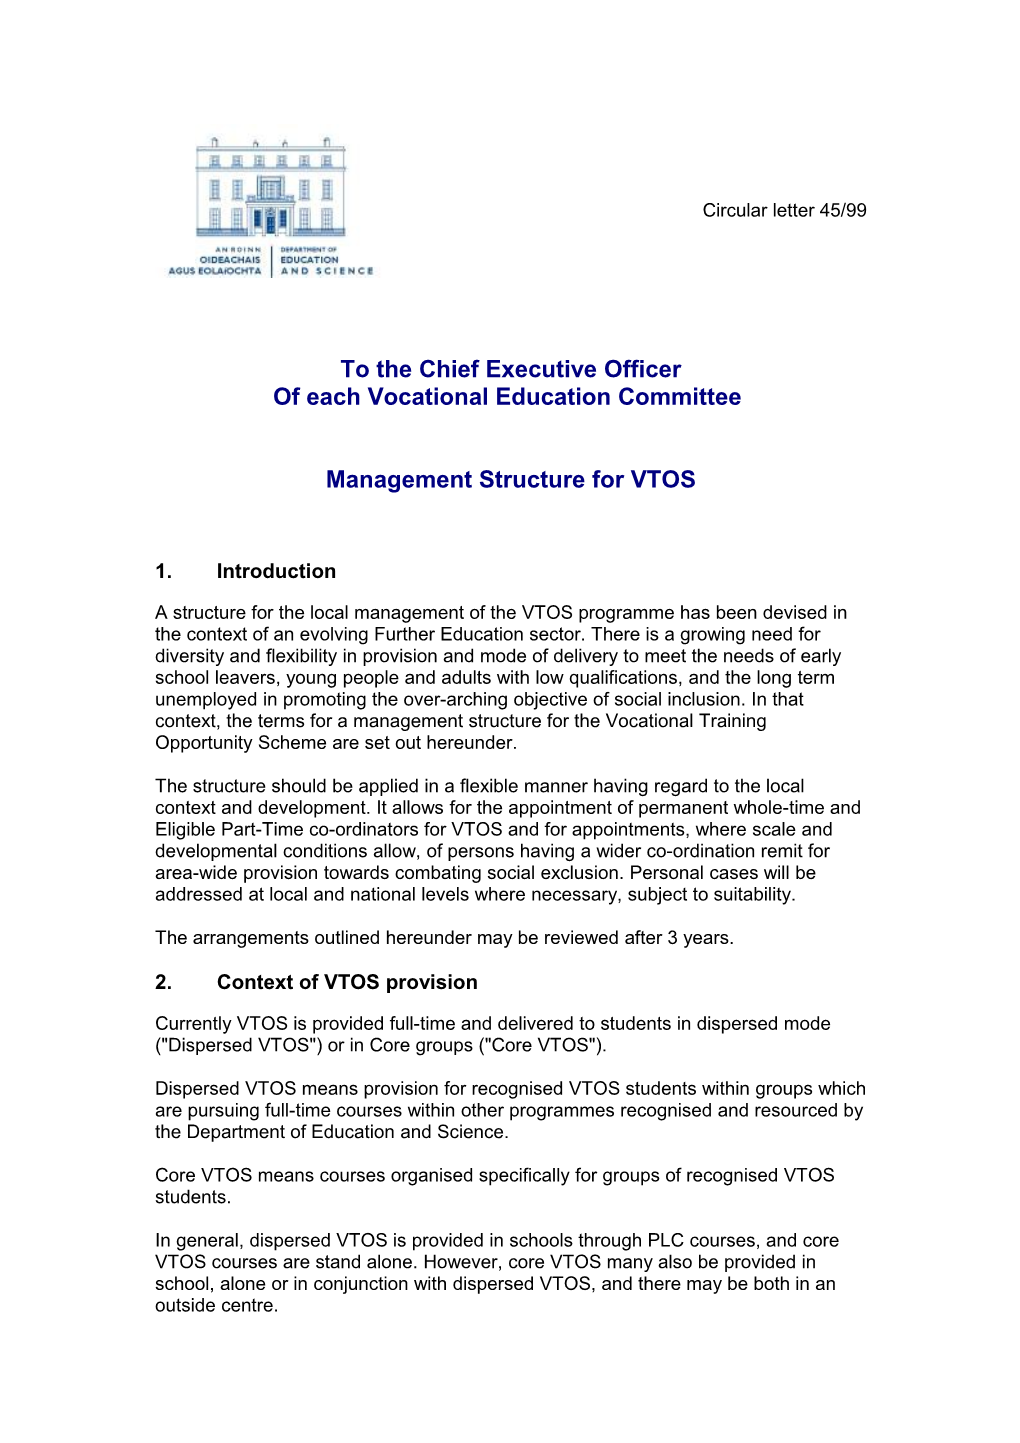 Further Education Circular 45/99 - Management Structure for VTOS (Format Word 63KB)